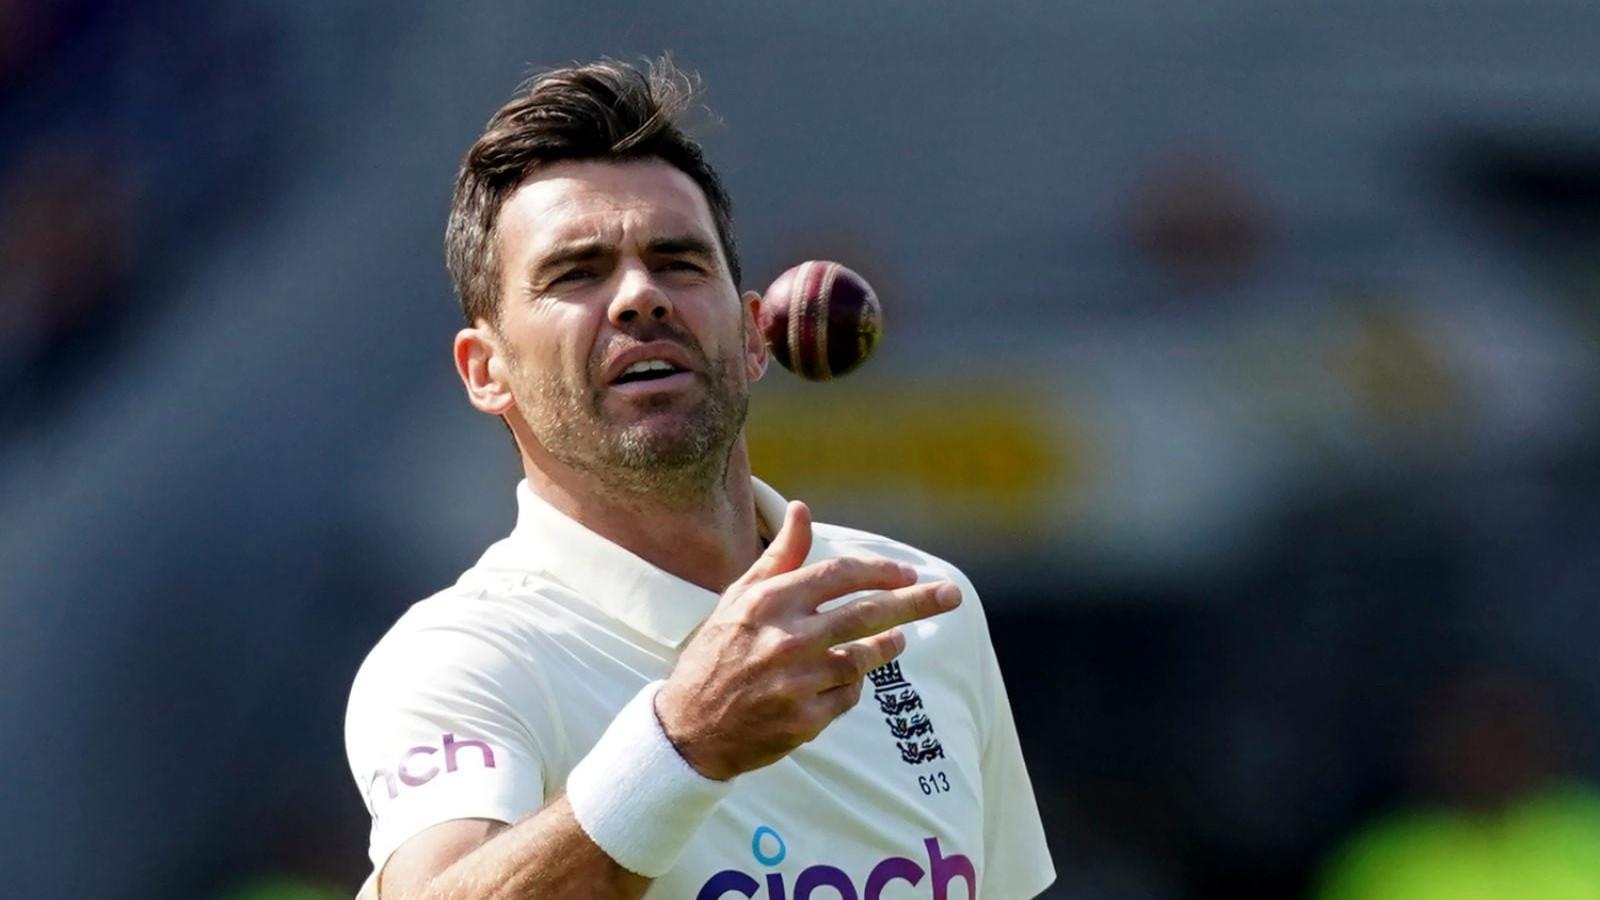 ENG v SA 2022: England’s James Anderson becomes first cricketer to play 100 Tests at home